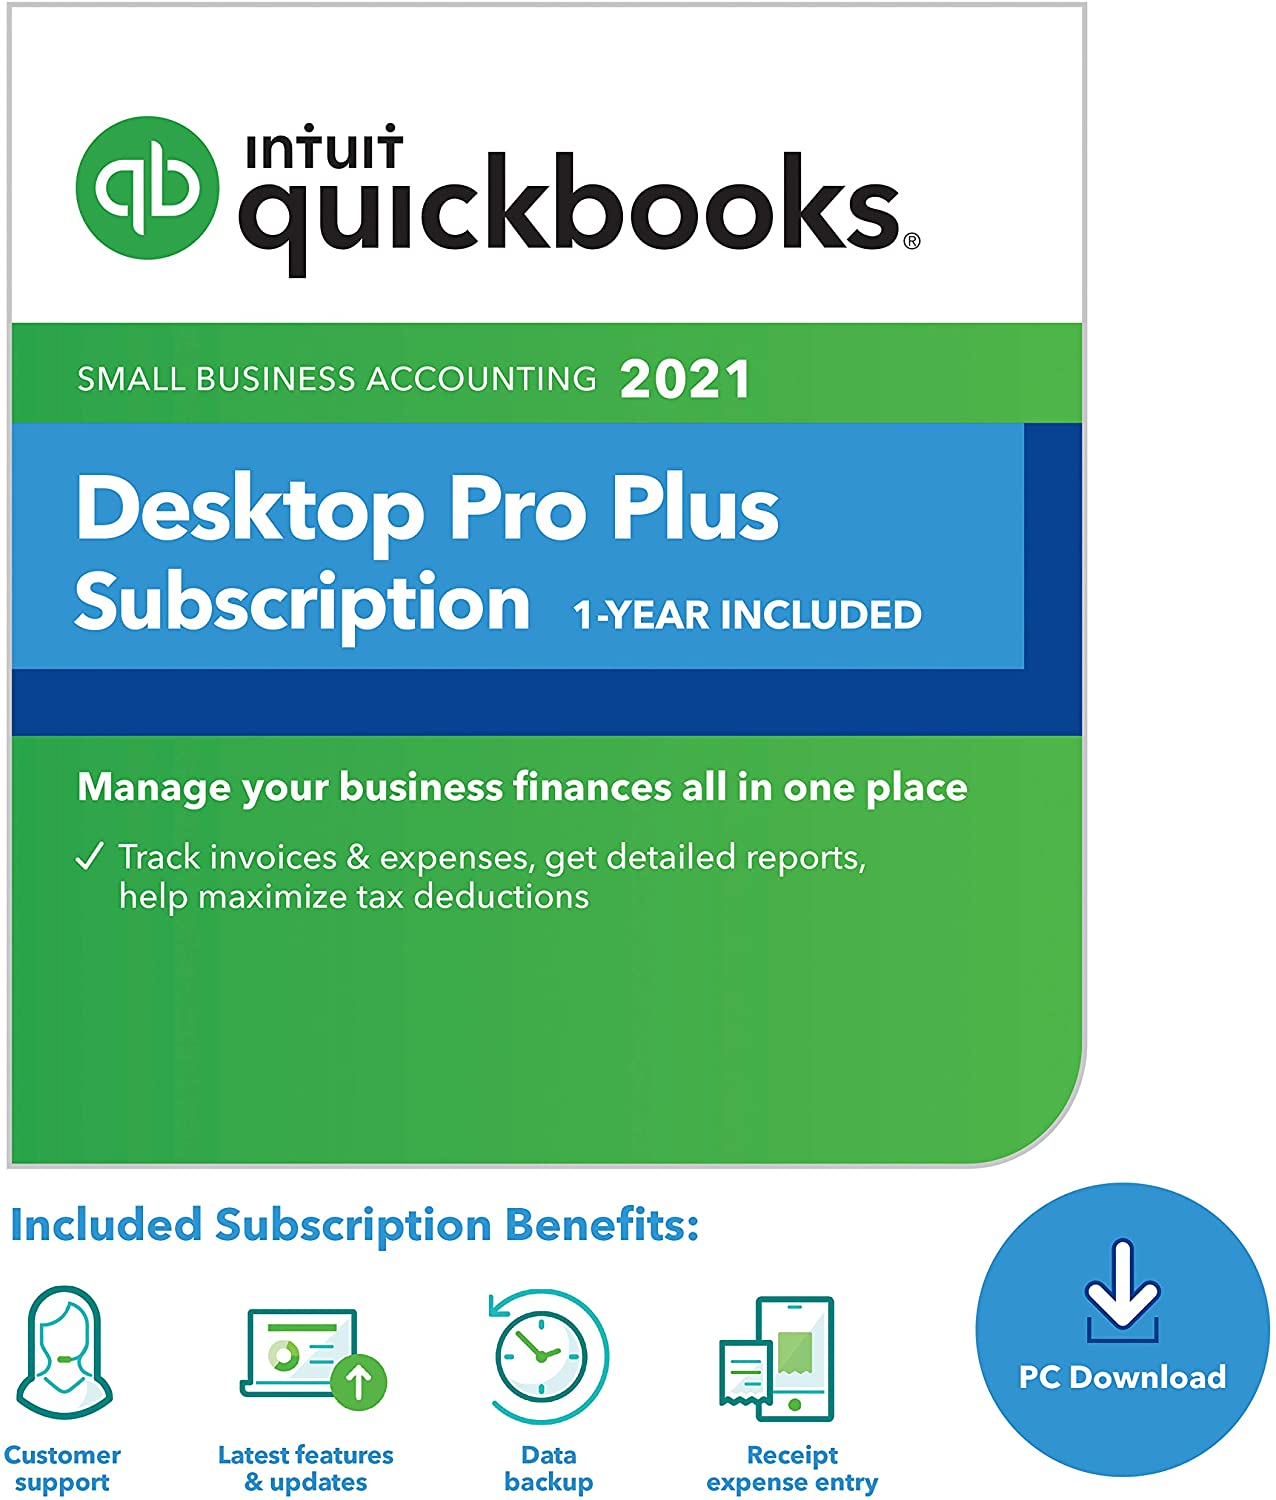 what year did quickbooks for windows start to offer file conversion for the mac